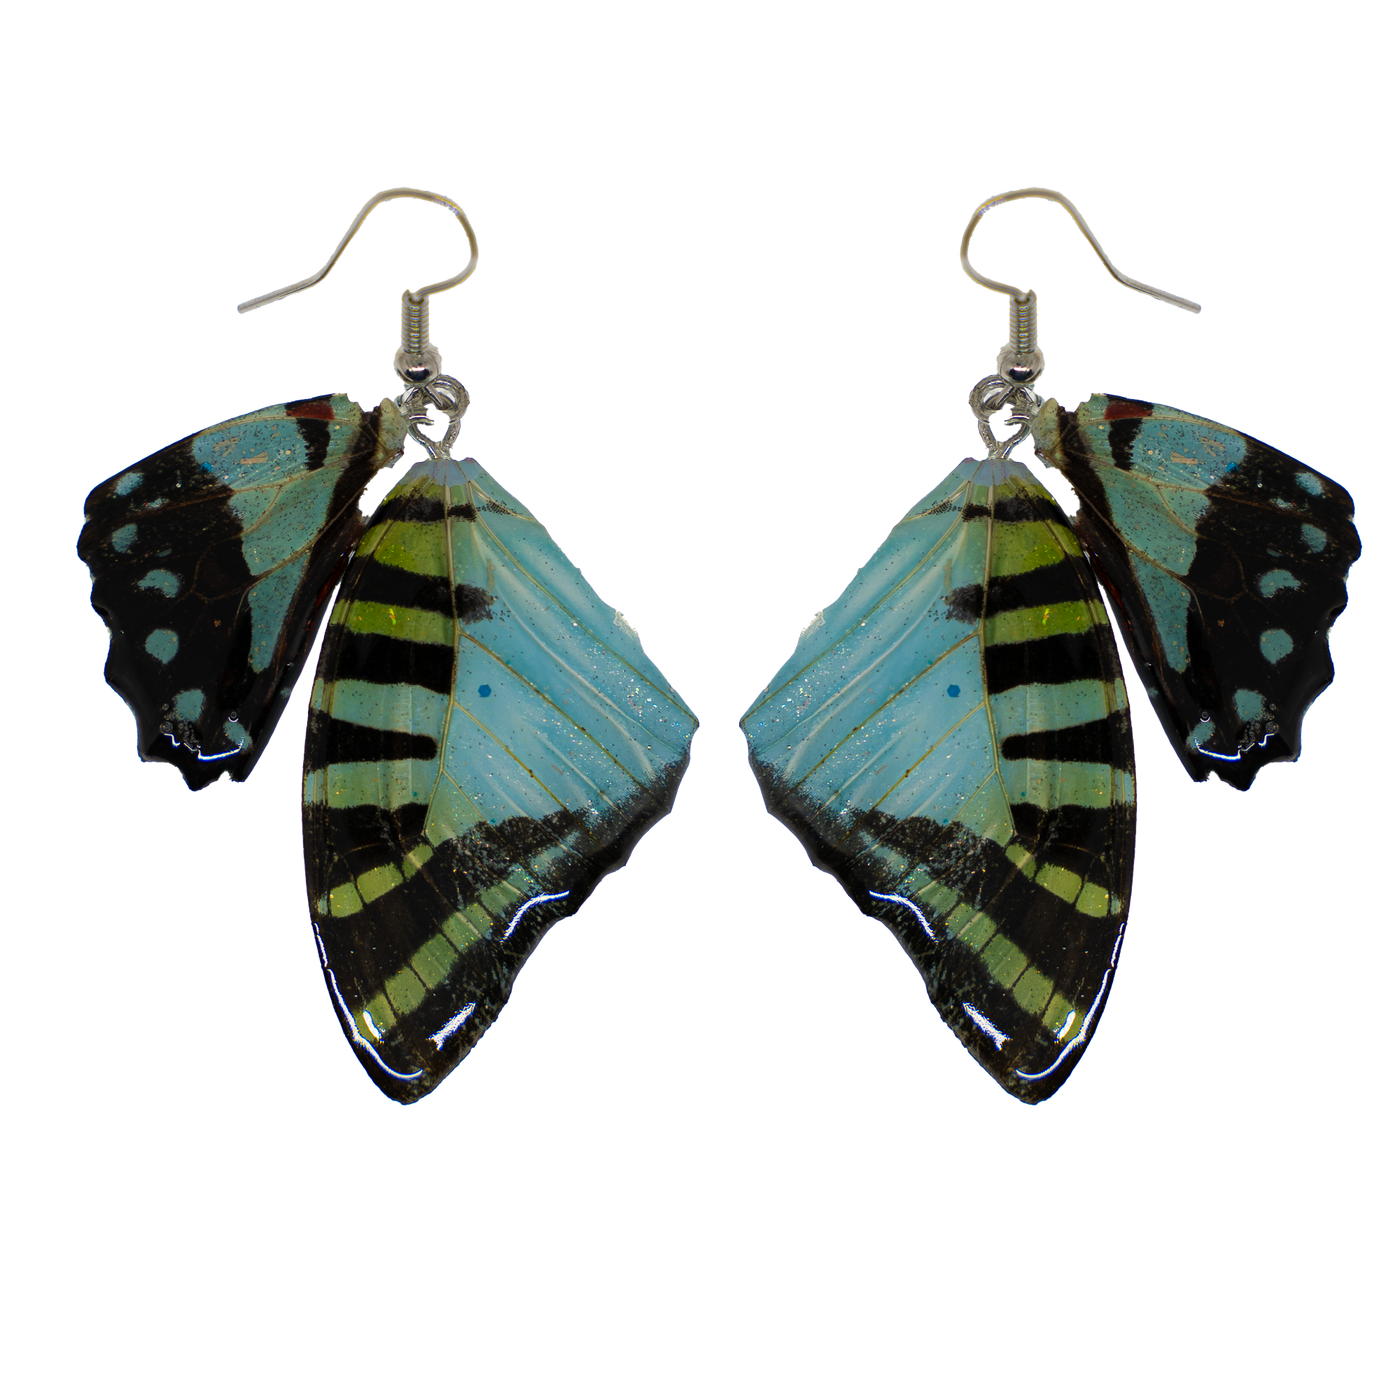 Light Blue real butterfly wings encased in resin & attached to 925 sterling silver wires